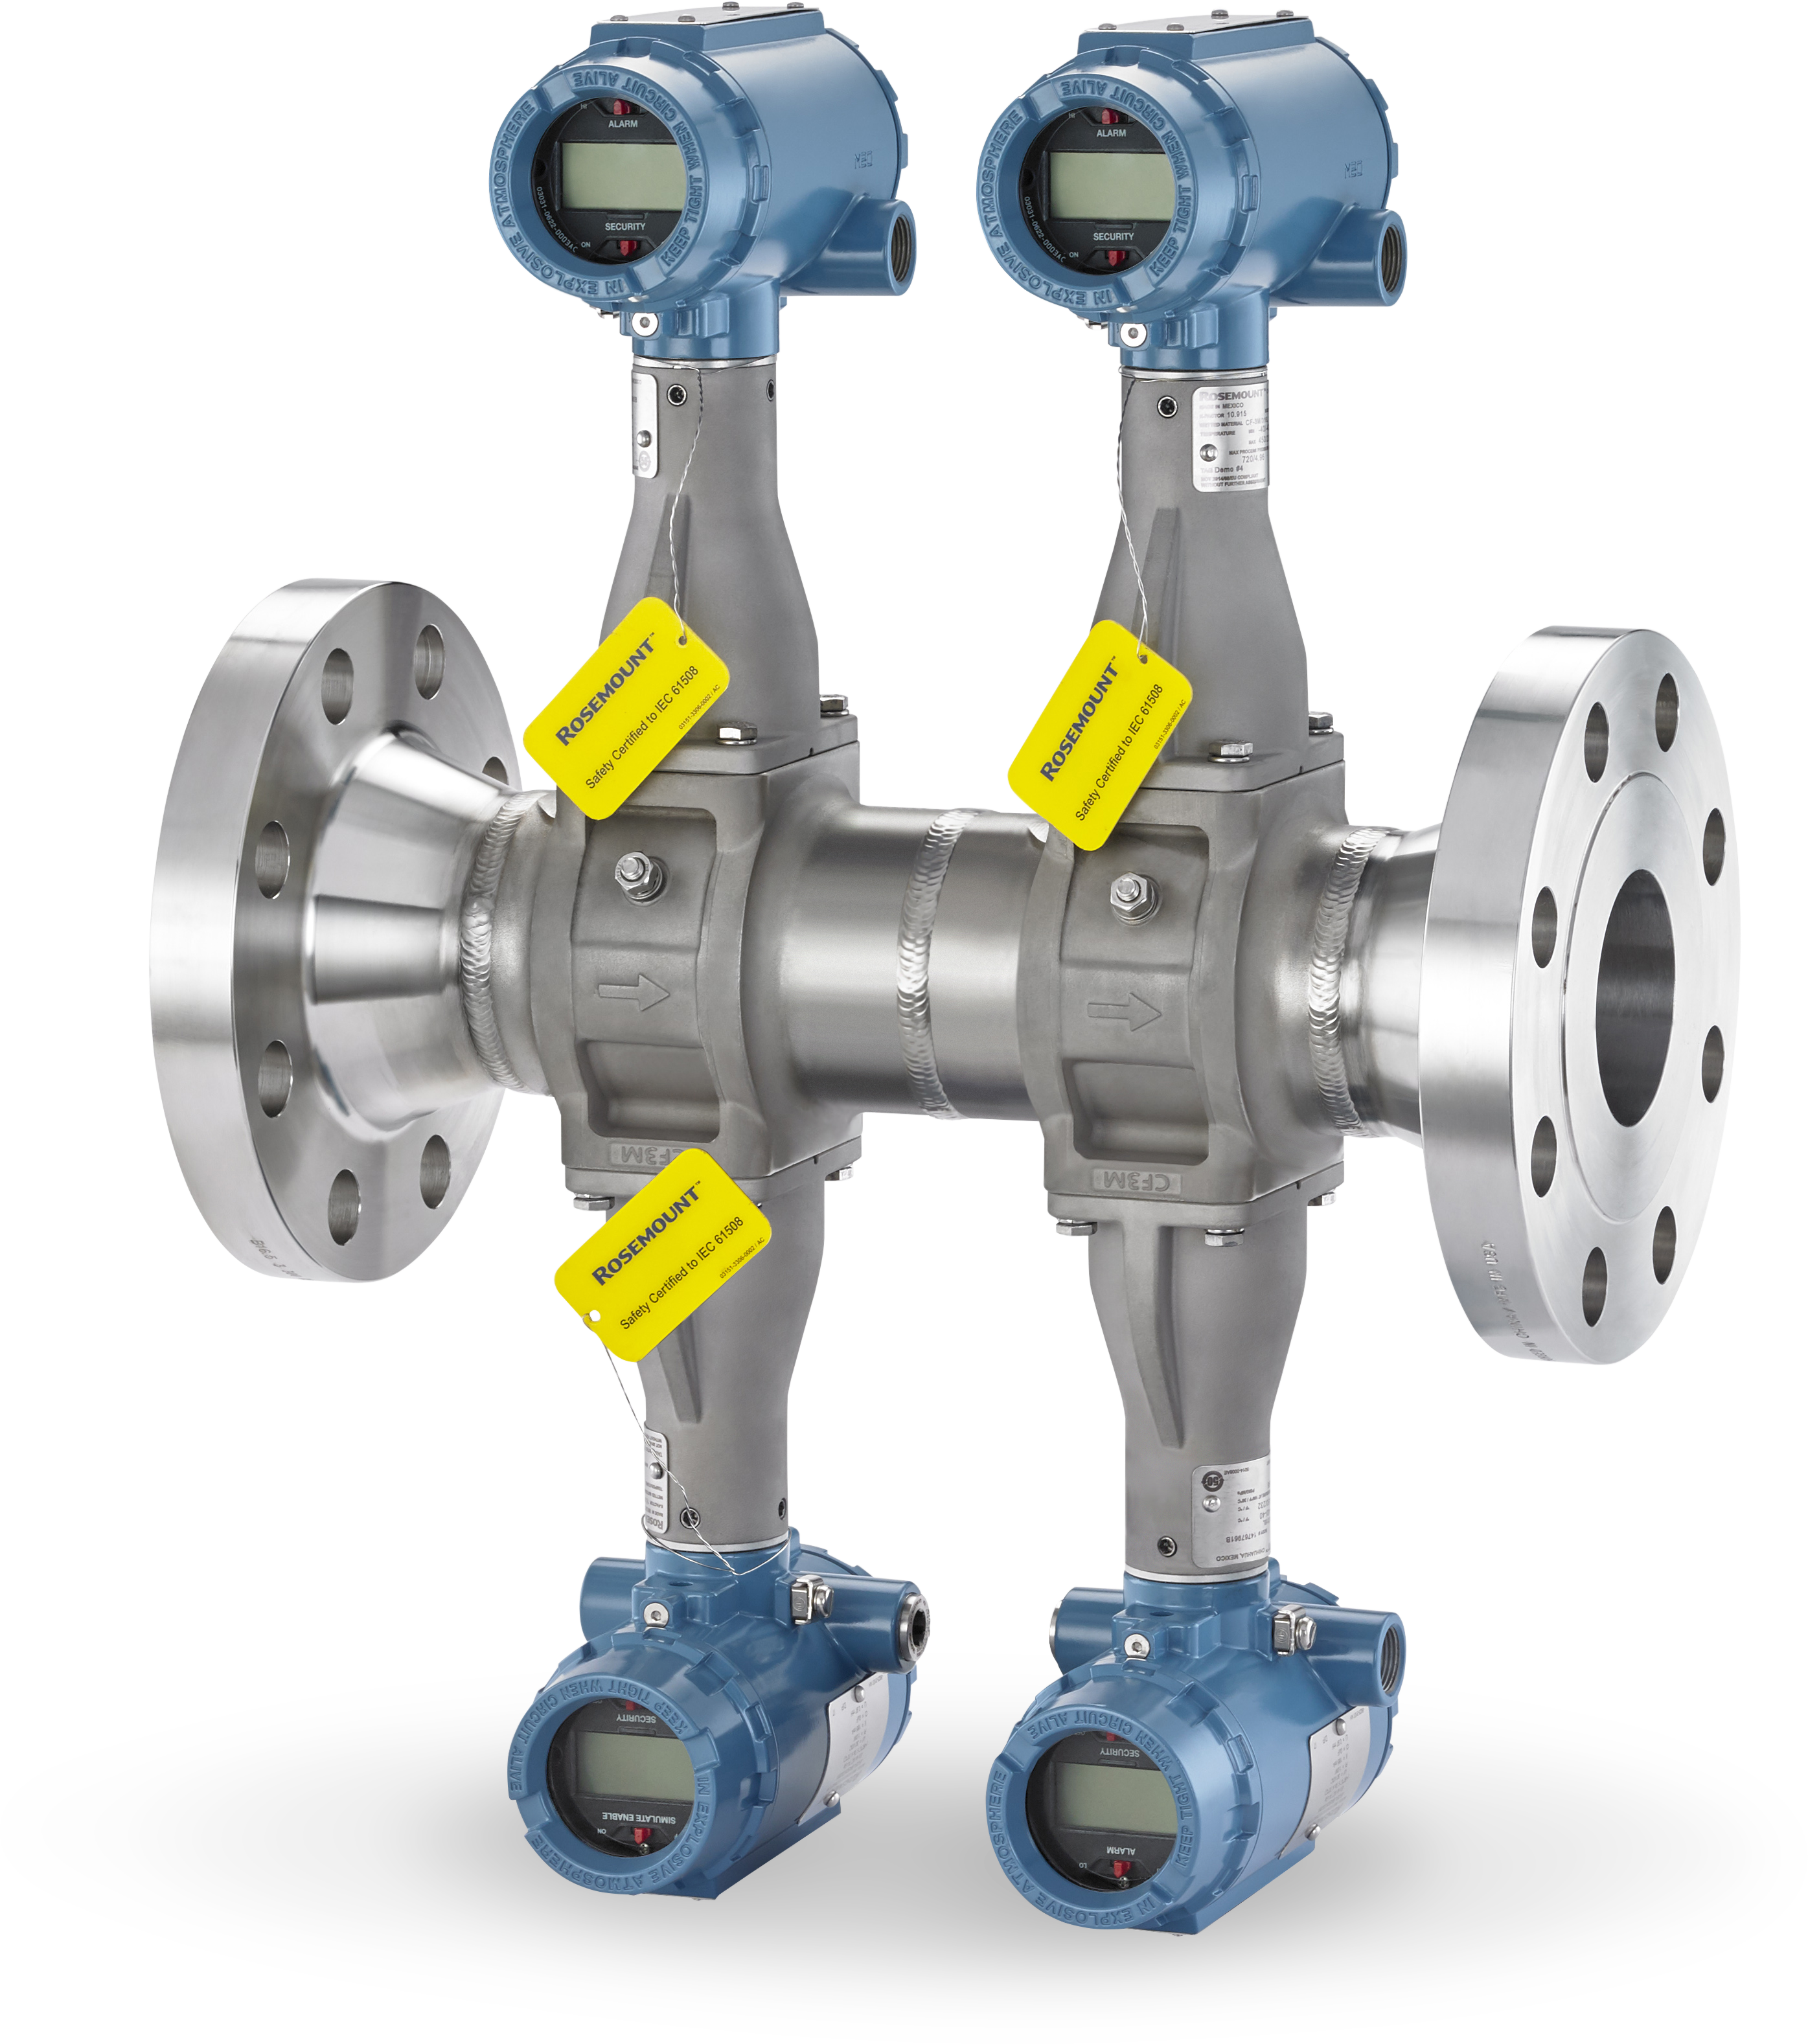 Emerson Offers Industry’s First “Four-in-One” Compact Flow Meter